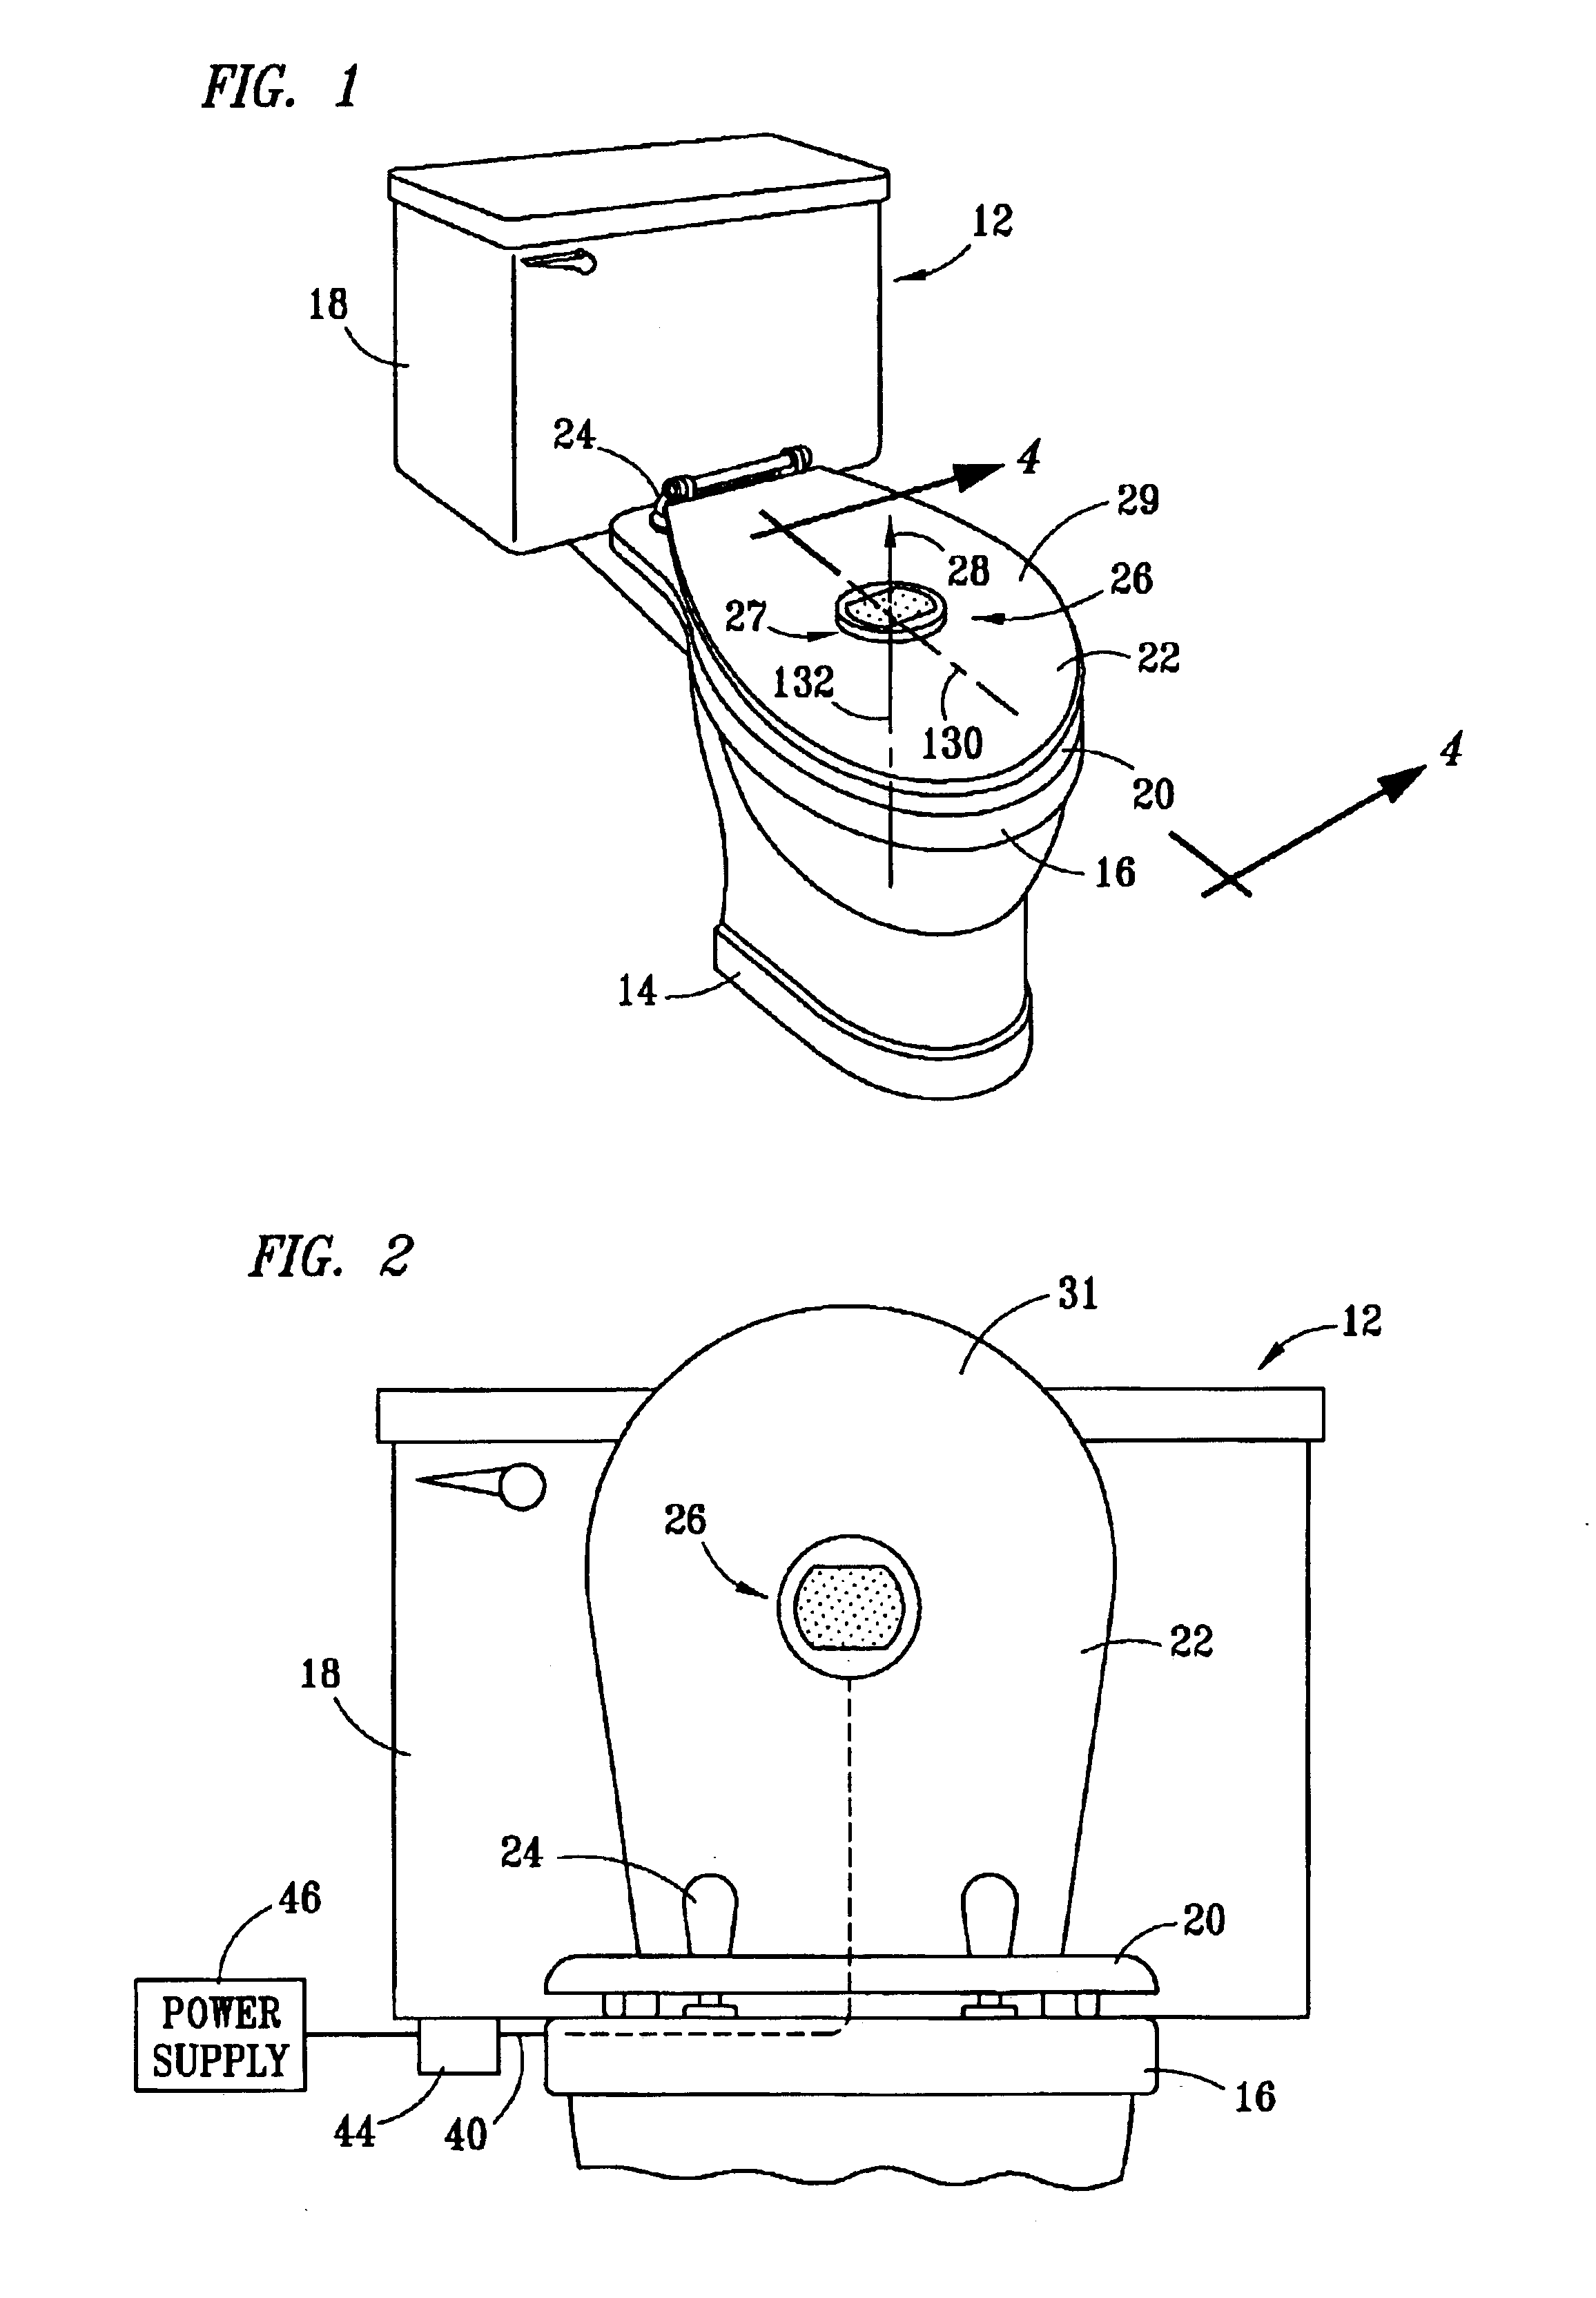 Self-contained exhaust fan for a water closet